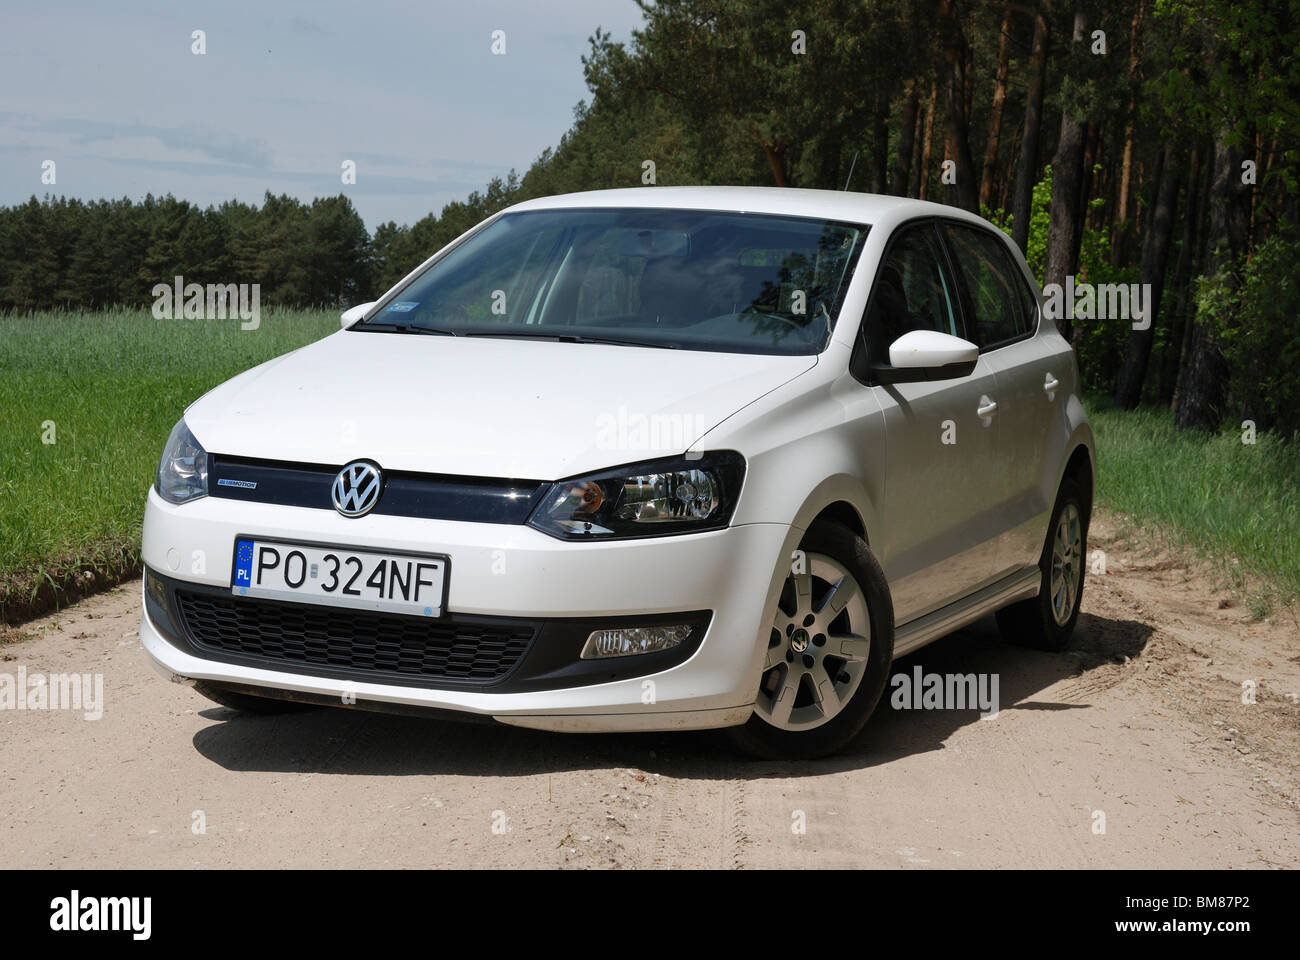 Polo 1.2 TDI BlueMotion - MY 2010 - white - five doors (5D) - German  subcompact city car - on countryside road Stock Photo - Alamy